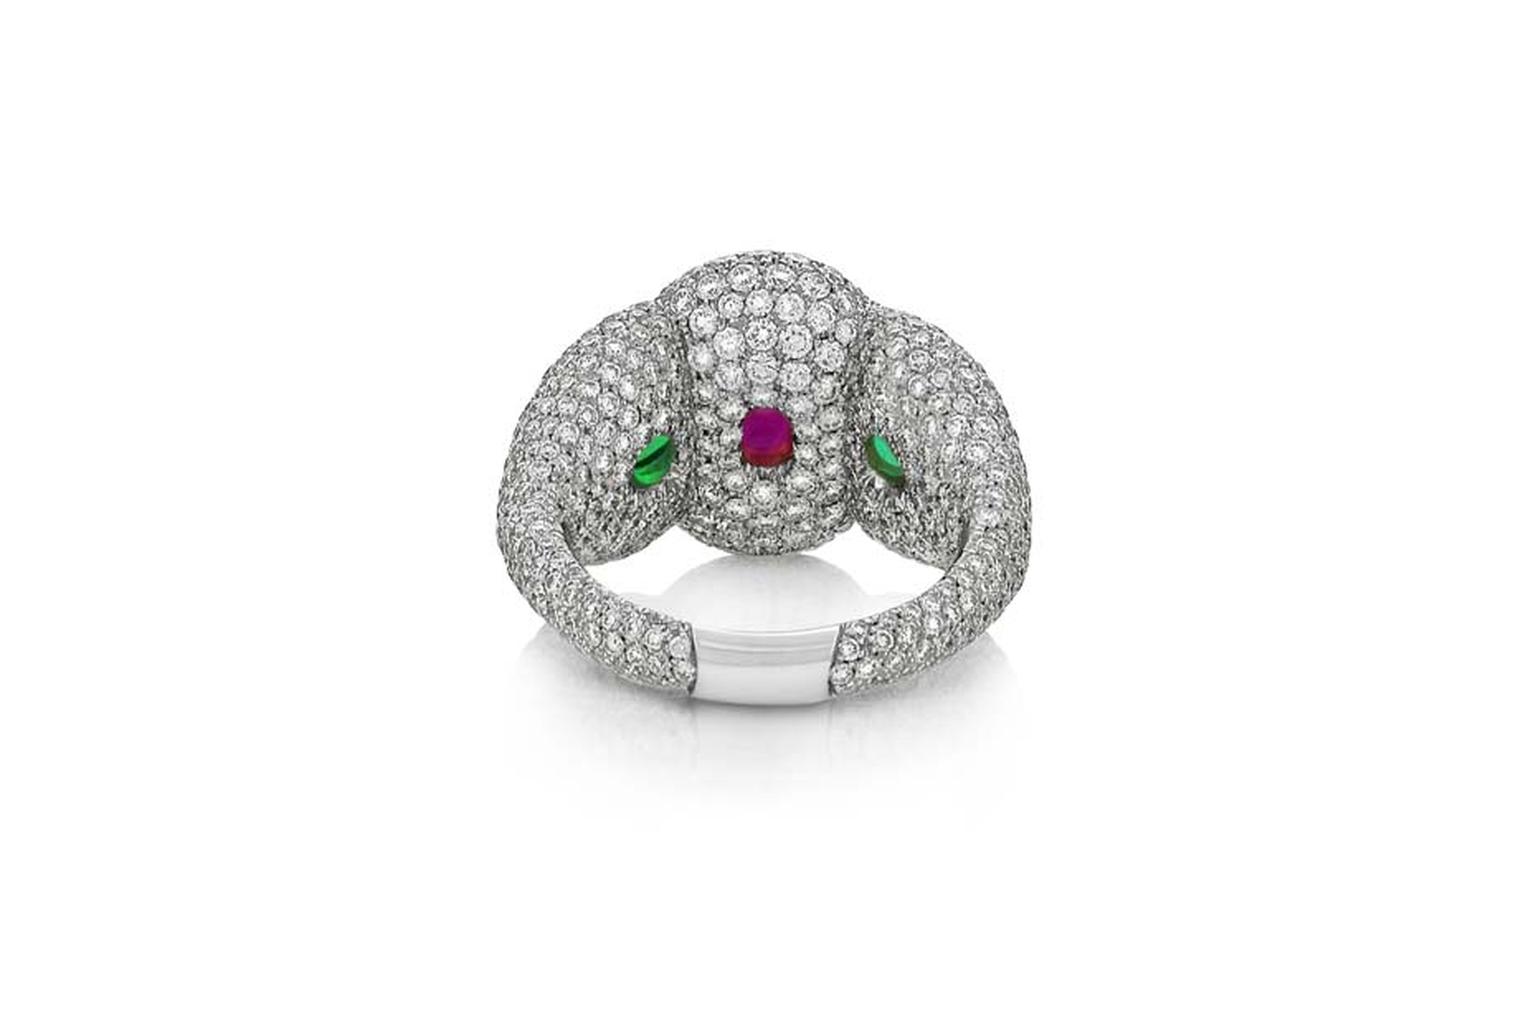 The African ruby and emeralds peep through when viewed from behind in Niquesa's Rose of the Desert ring.